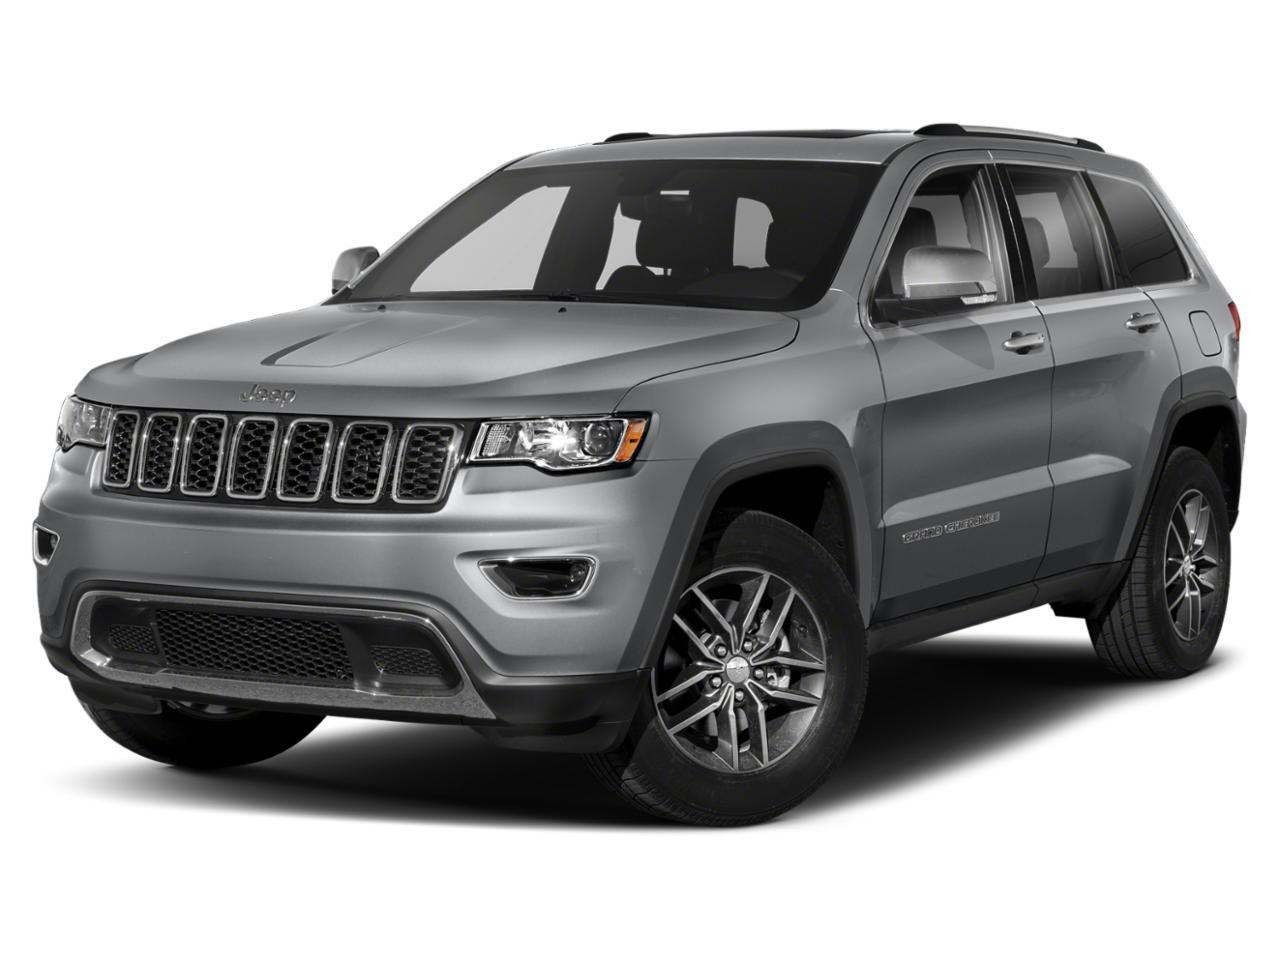 2020 Jeep Grand Cherokee LIMITED IN BILLET SILVER EQUIPPED WITH A 3.6L V6 ,